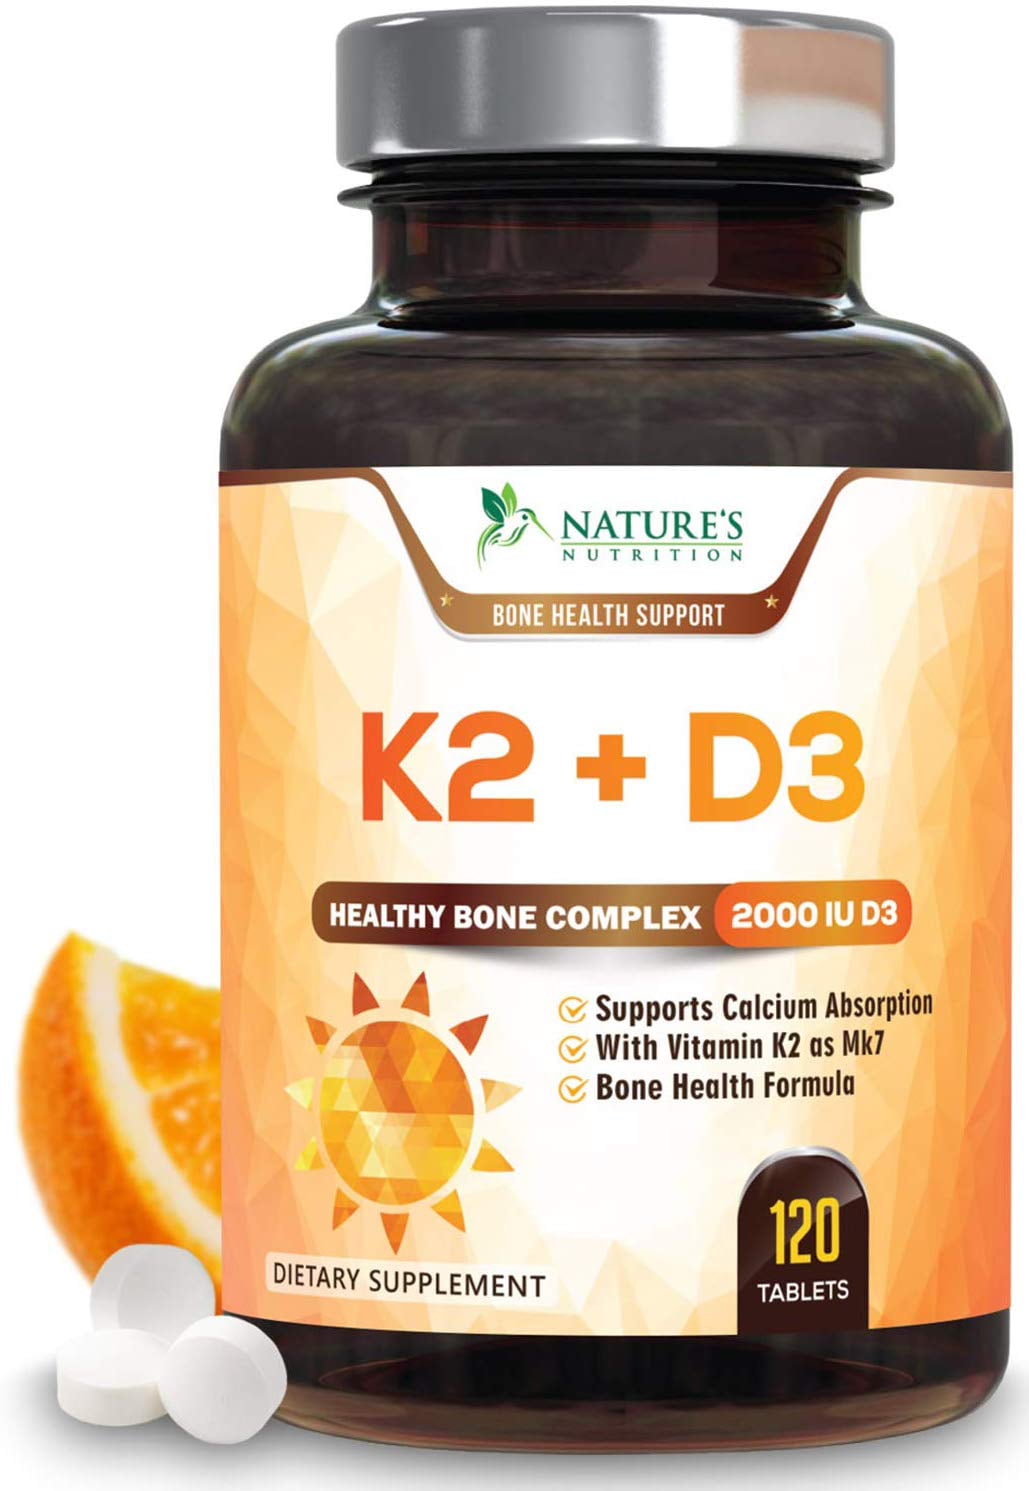 Nature's Nutrition Vitamin K2 (MK7) with D3 Supplement ...